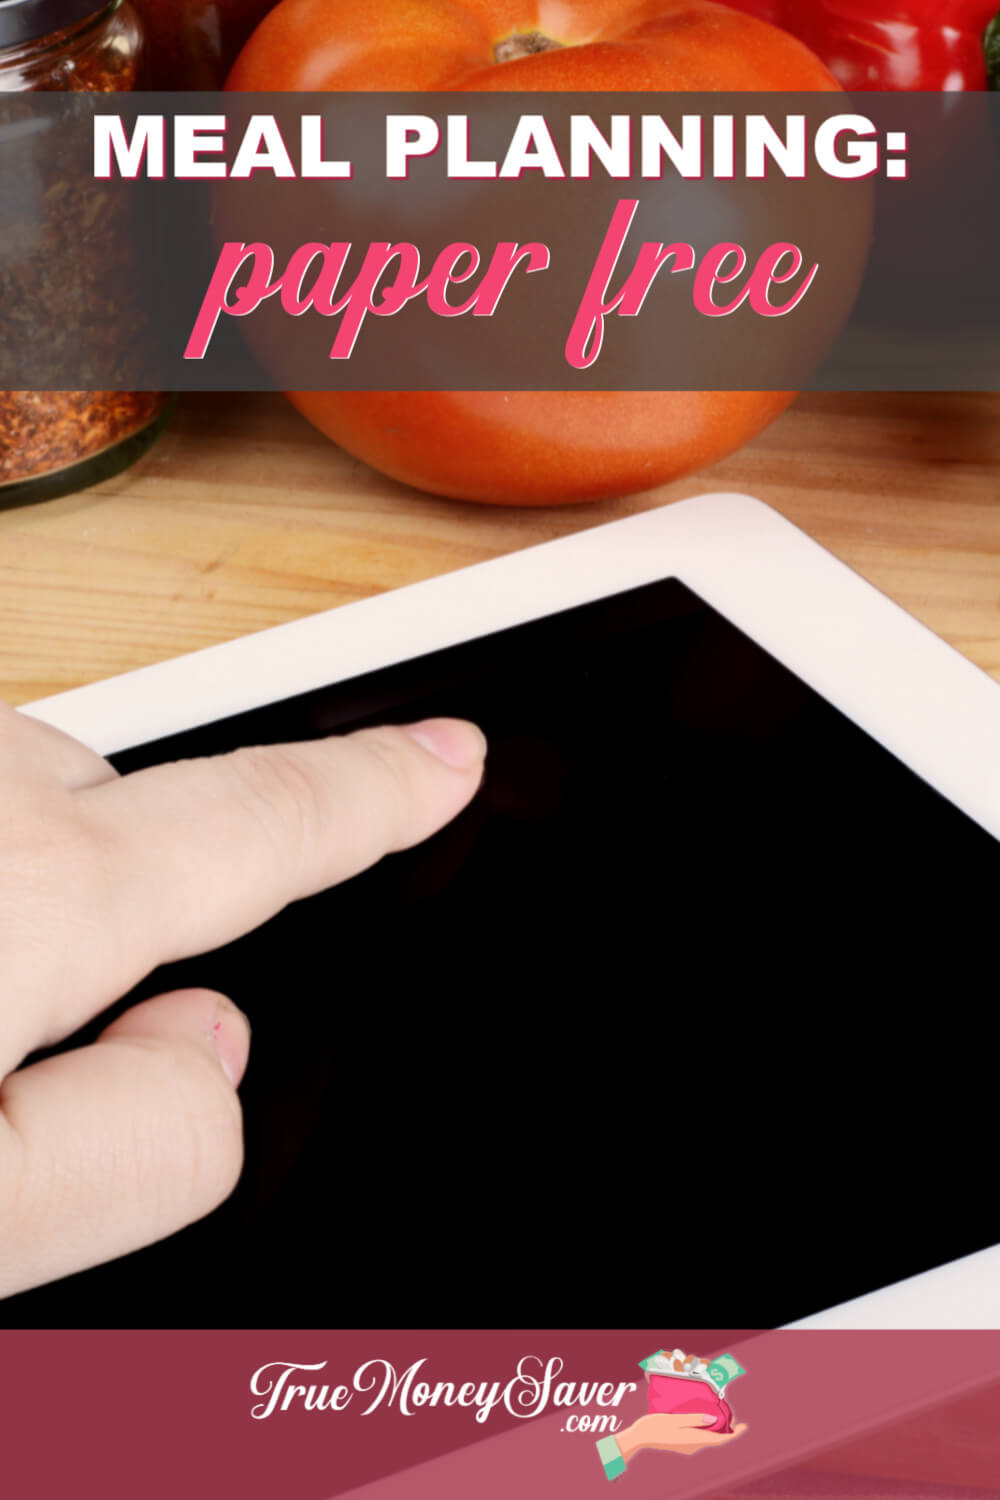 How To Organize Recipes For Paper Free Meal Planning